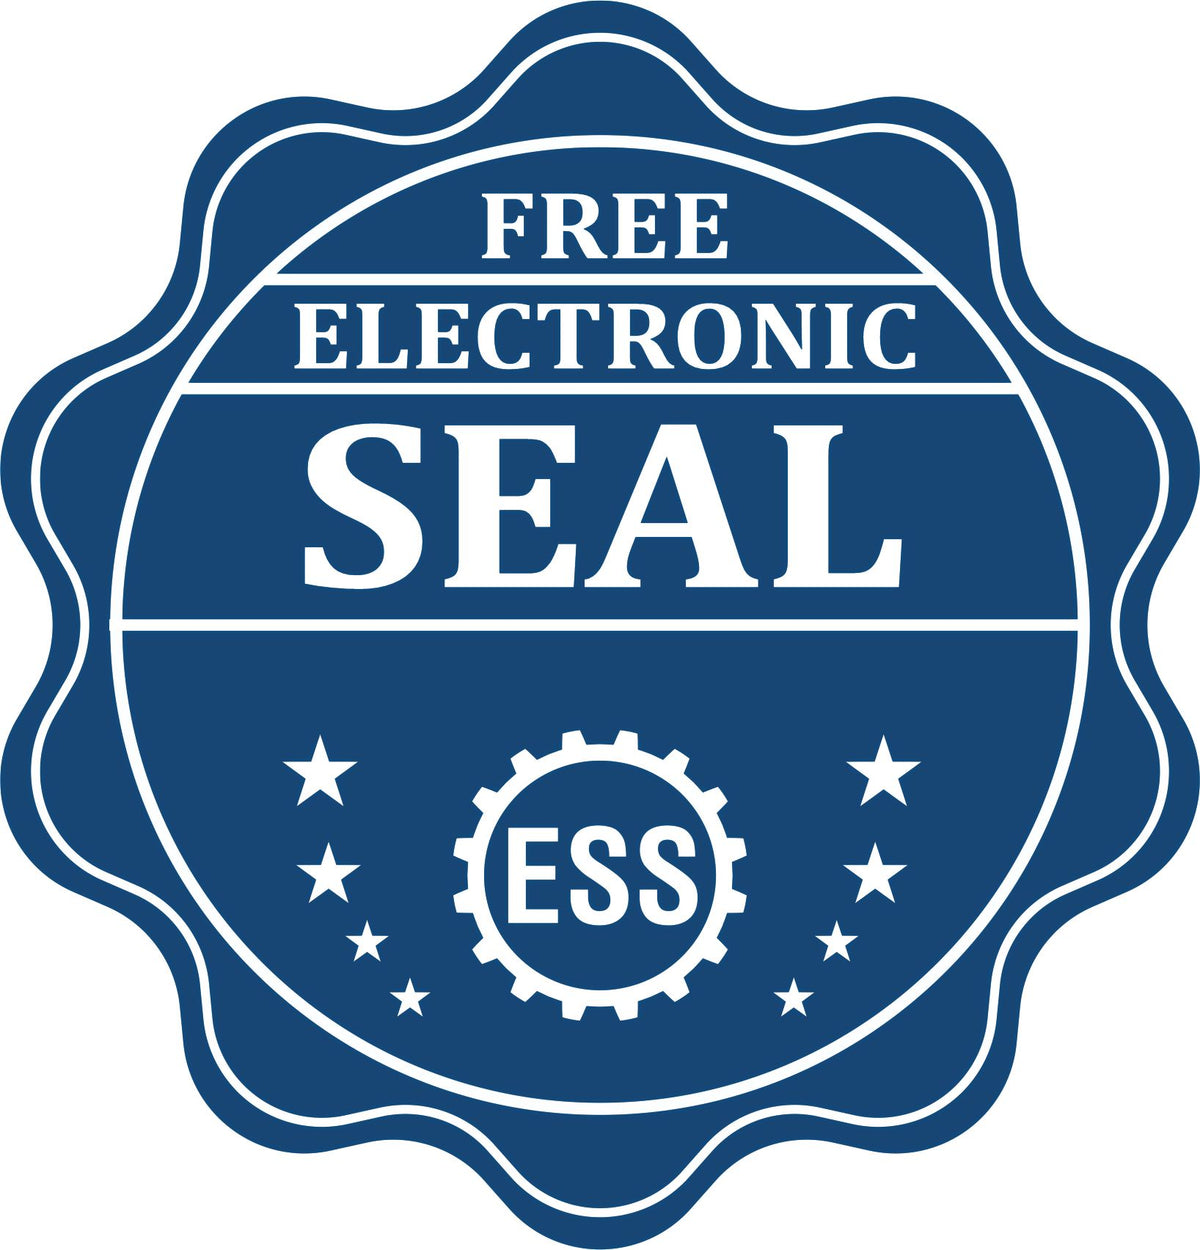 A badge showing a free electronic seal for the Soft Pocket Illinois Landscape Architect Embosser with stars and the ESS gear on the emblem.